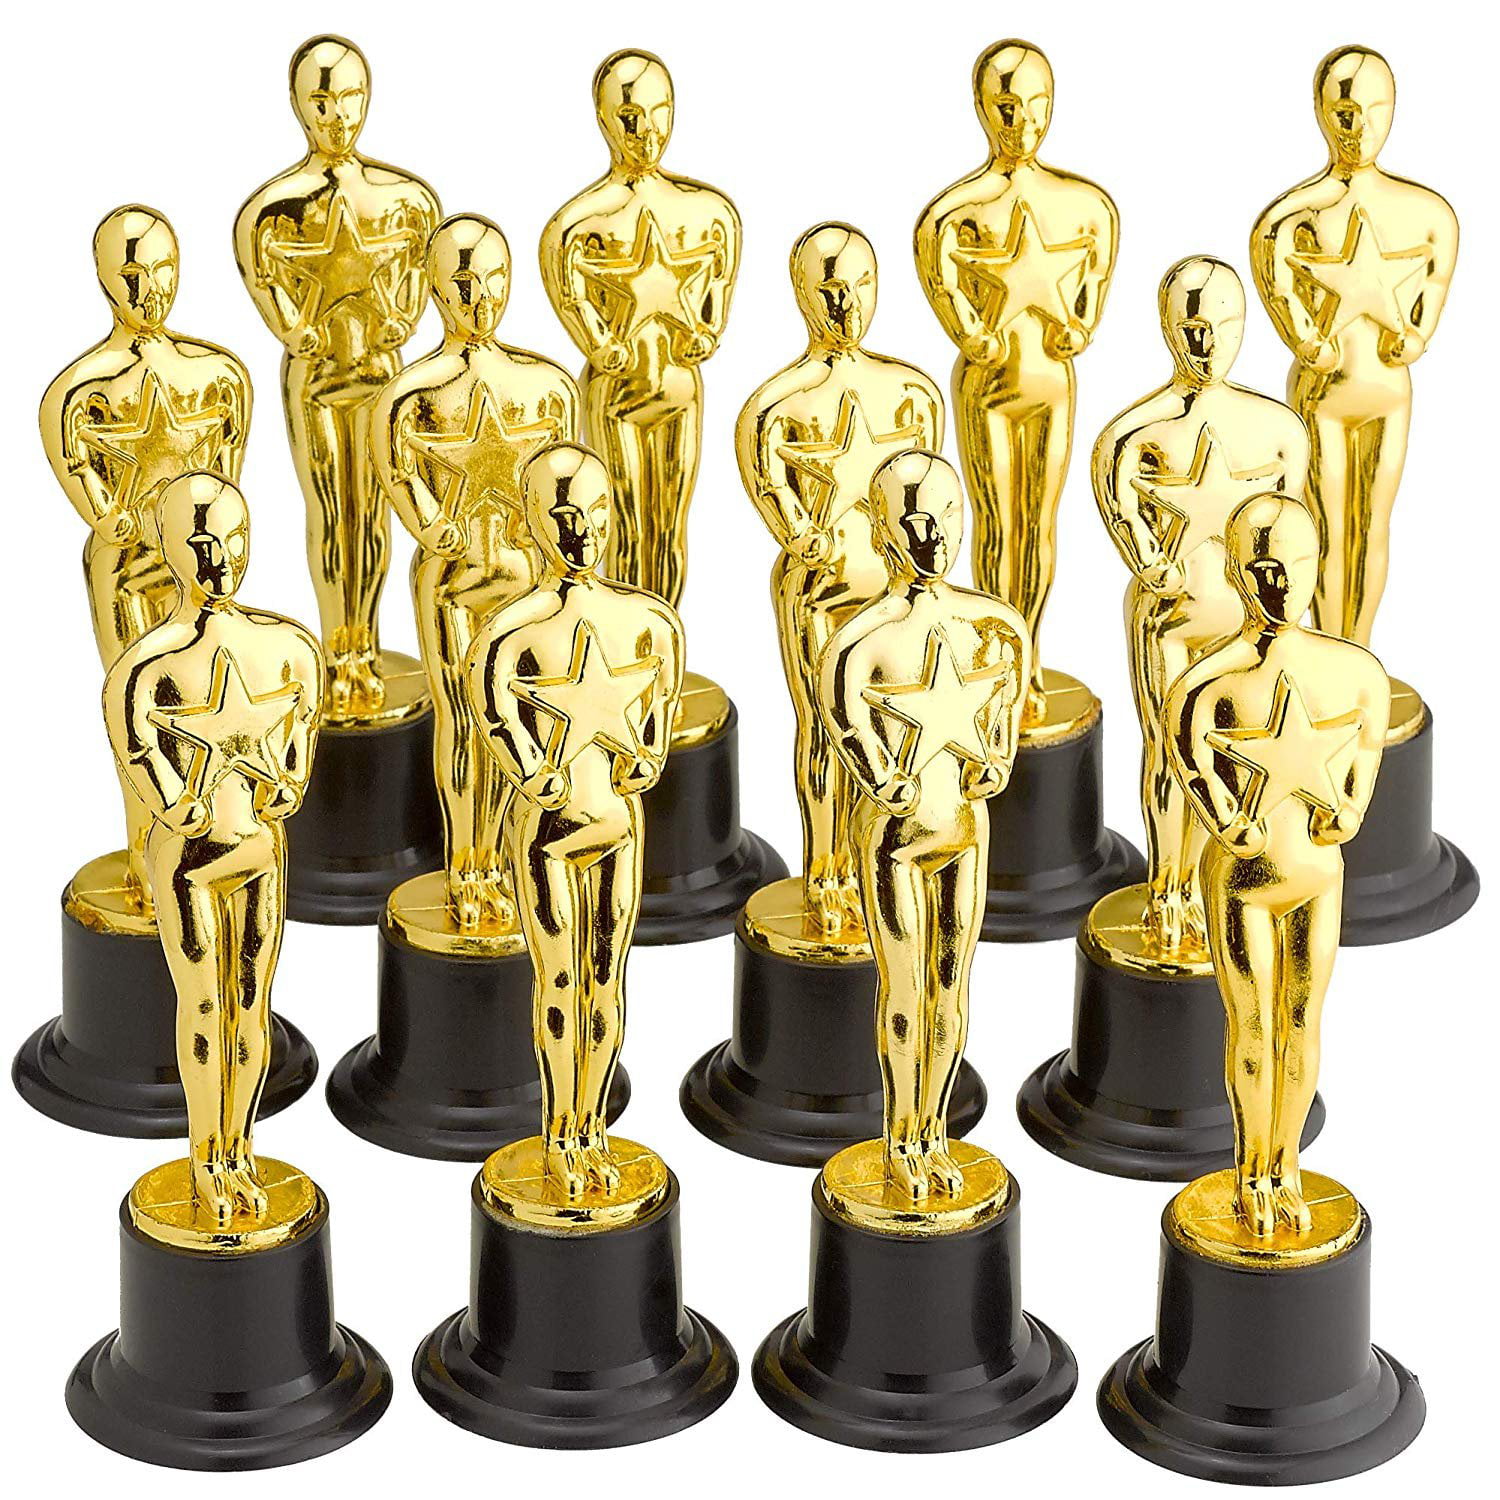 8 Pcs Award Trophy Safe Small Plastic Statues Photo Props Trophies for Parties 